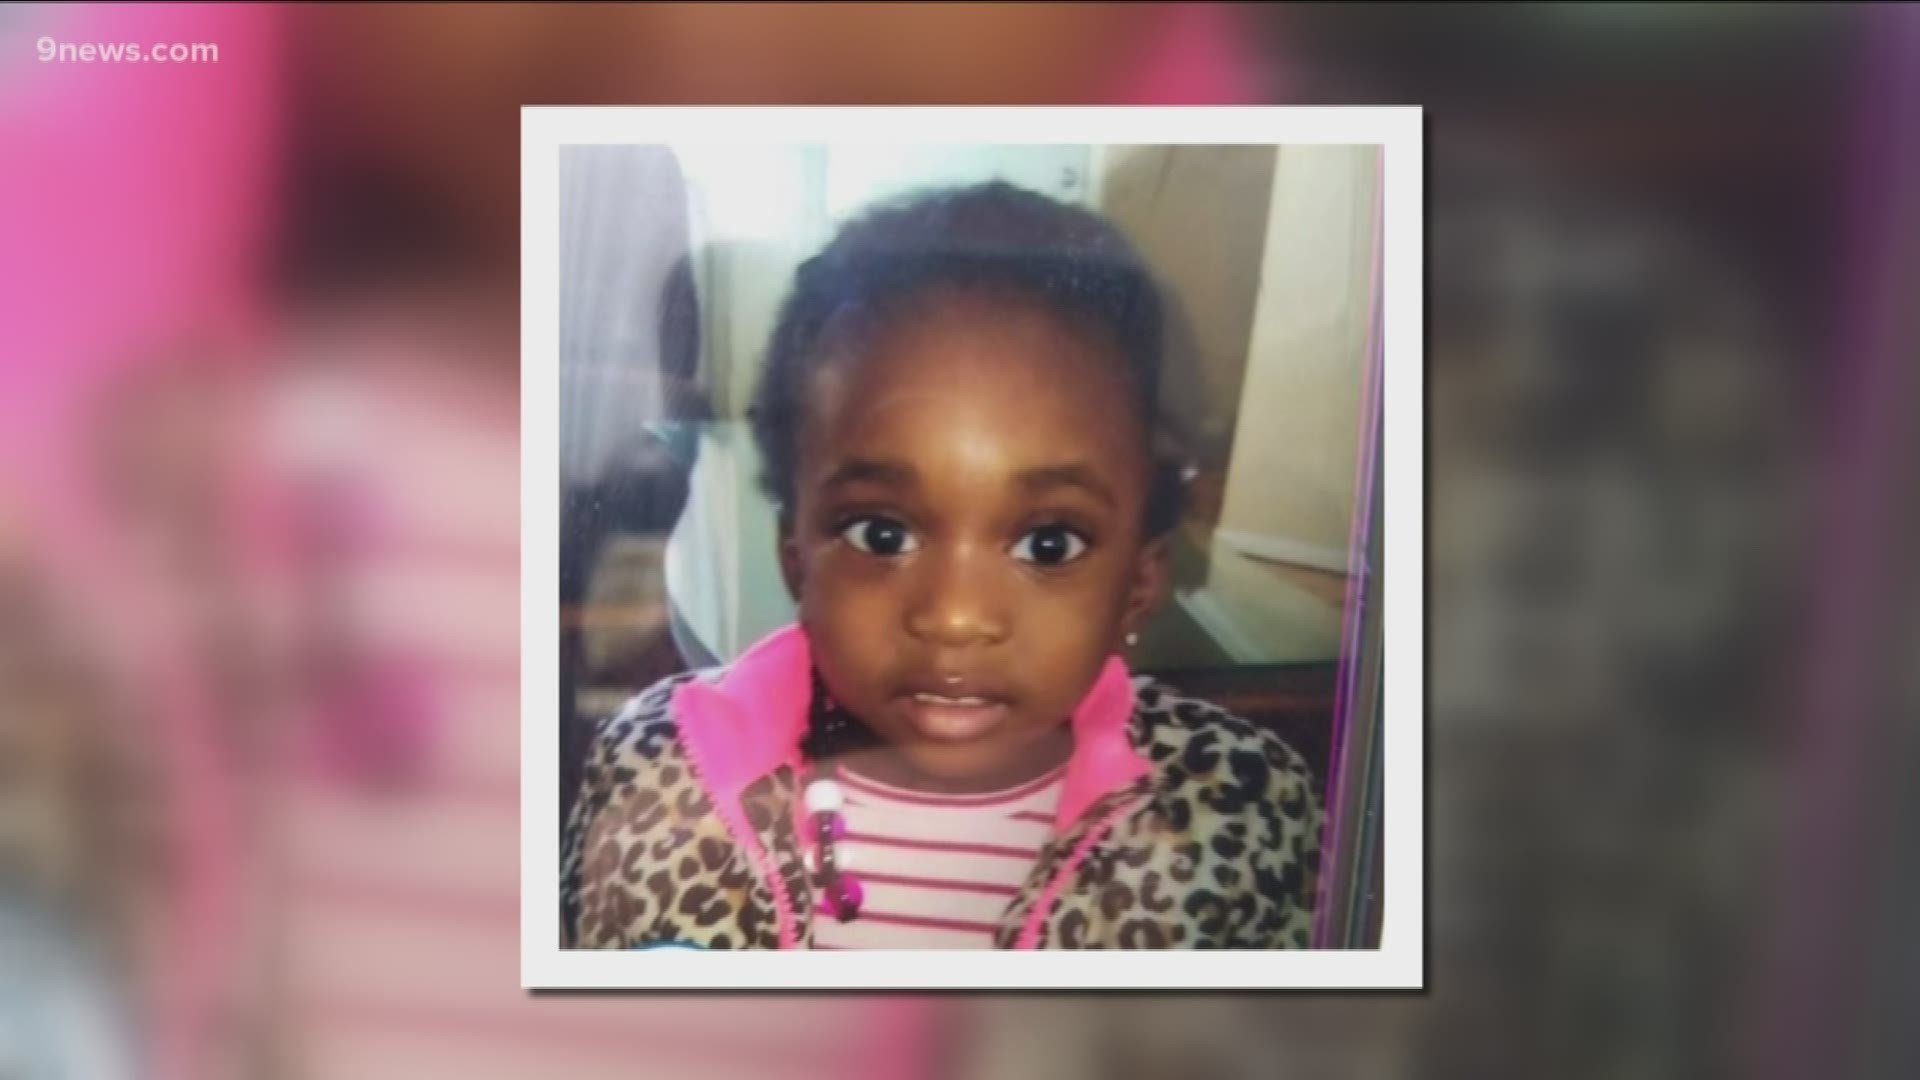 Officers found 18-month-old Miracle on Thursday night, more than 24 hours after she was last seen.